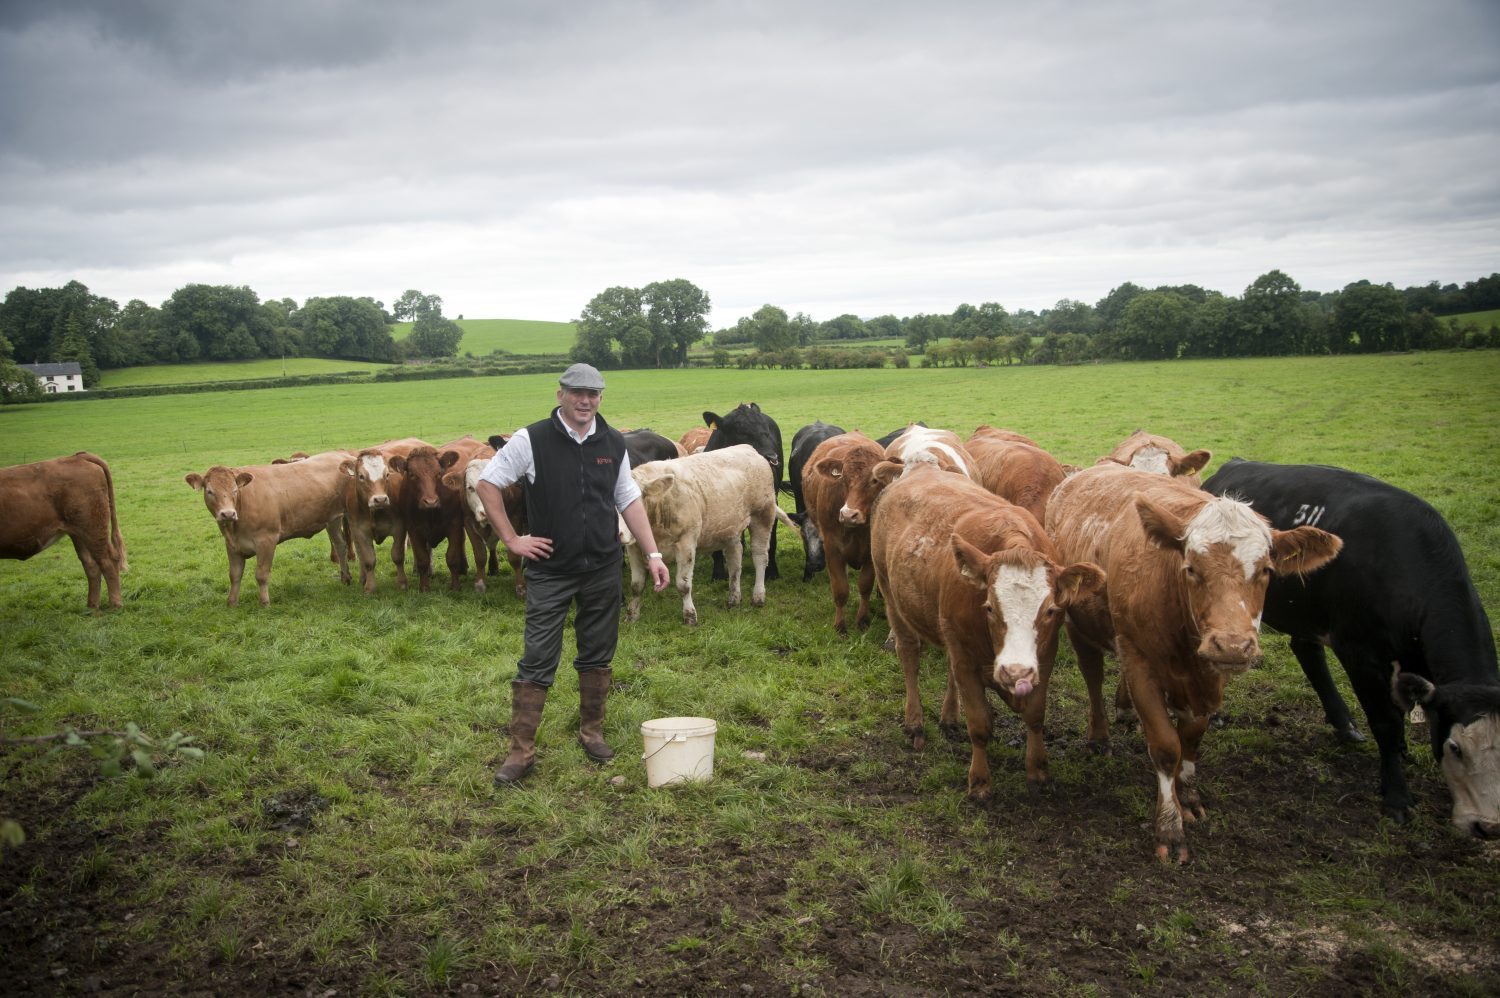 A visit to one of Ireland's beef farms